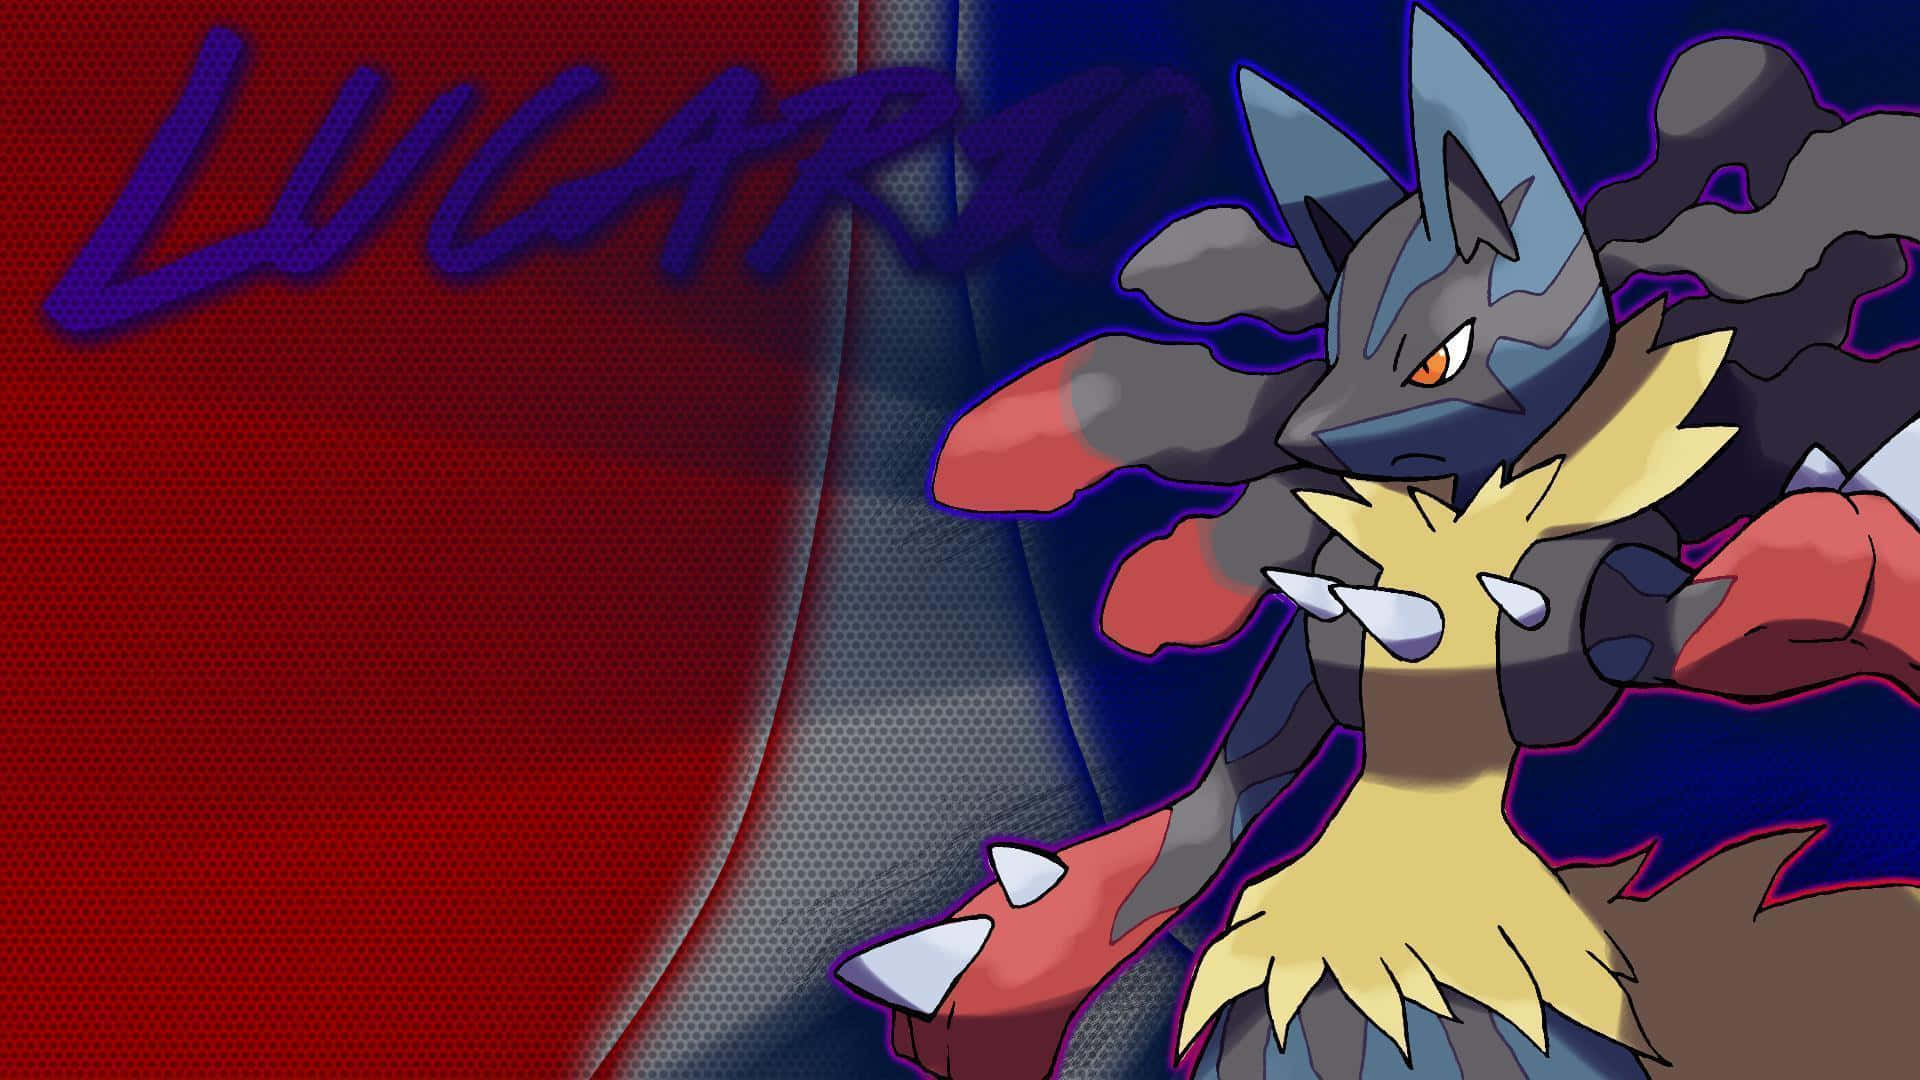 Lucario strikes a fighting pose, ready for battle